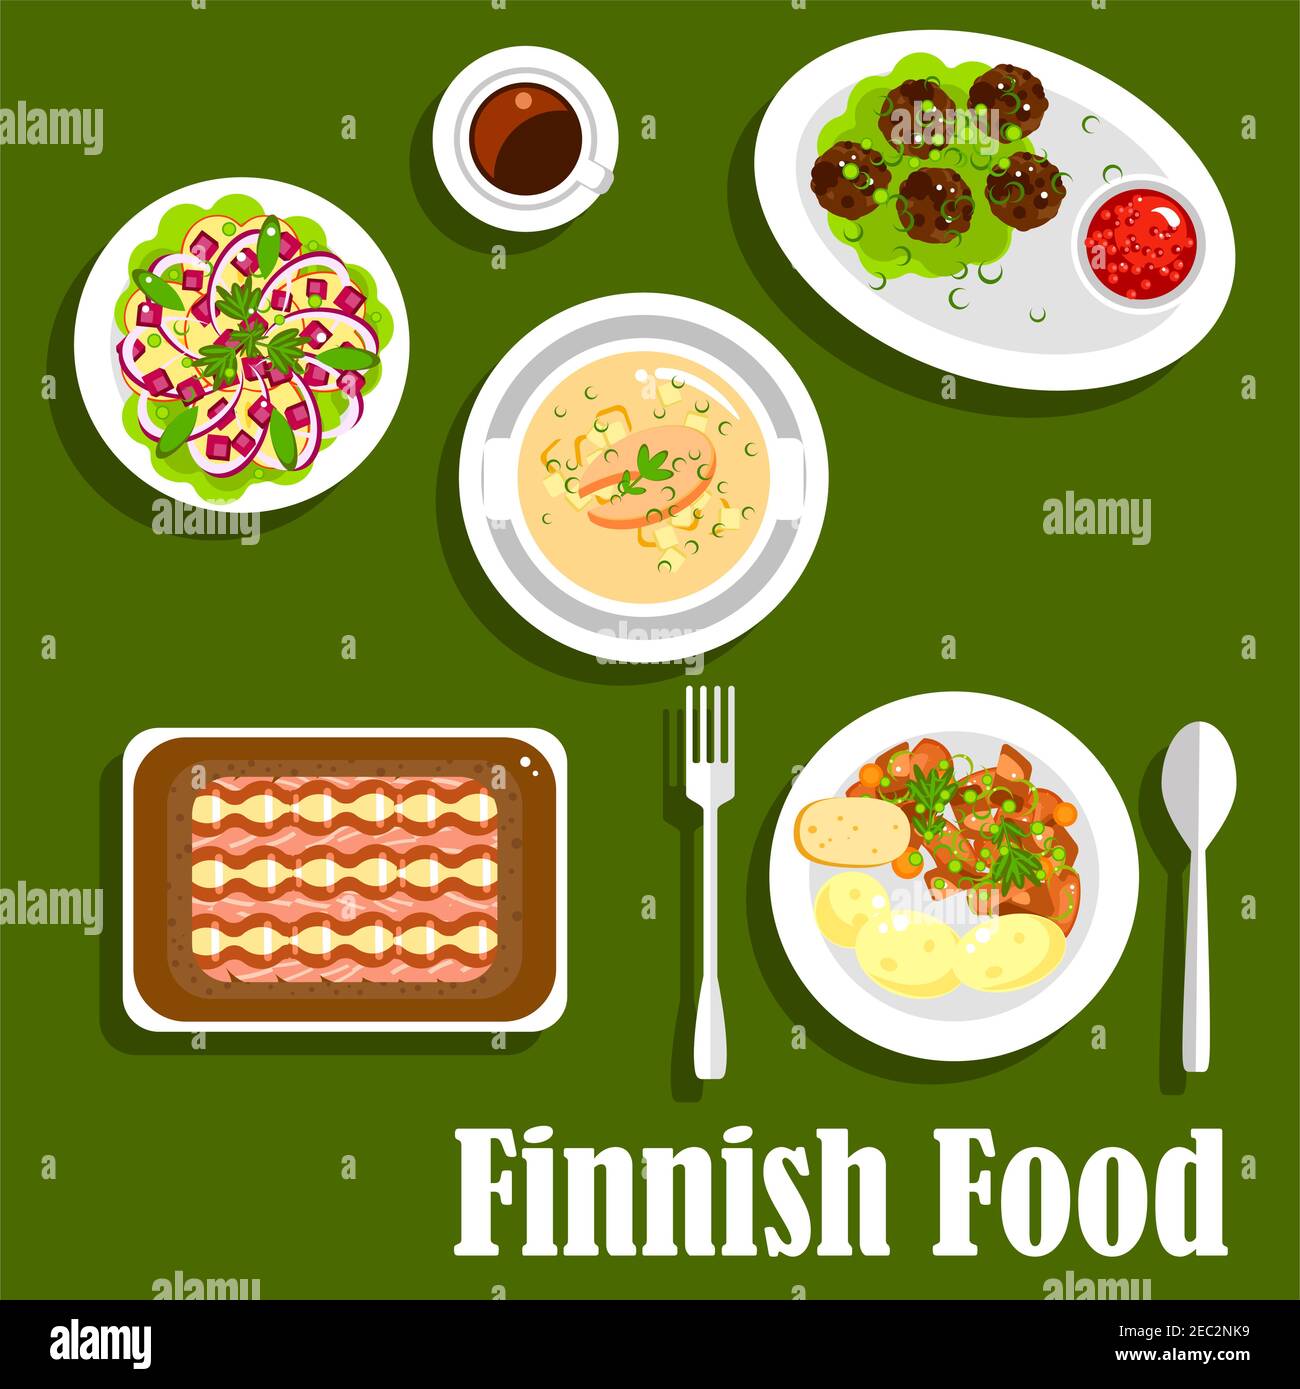 Traditional finnish fish rye pie kalakukko icon, served with salmon cream soup, boiled young potatoes with reindeer stew, meatballs, lingonberry jam, Stock Vector